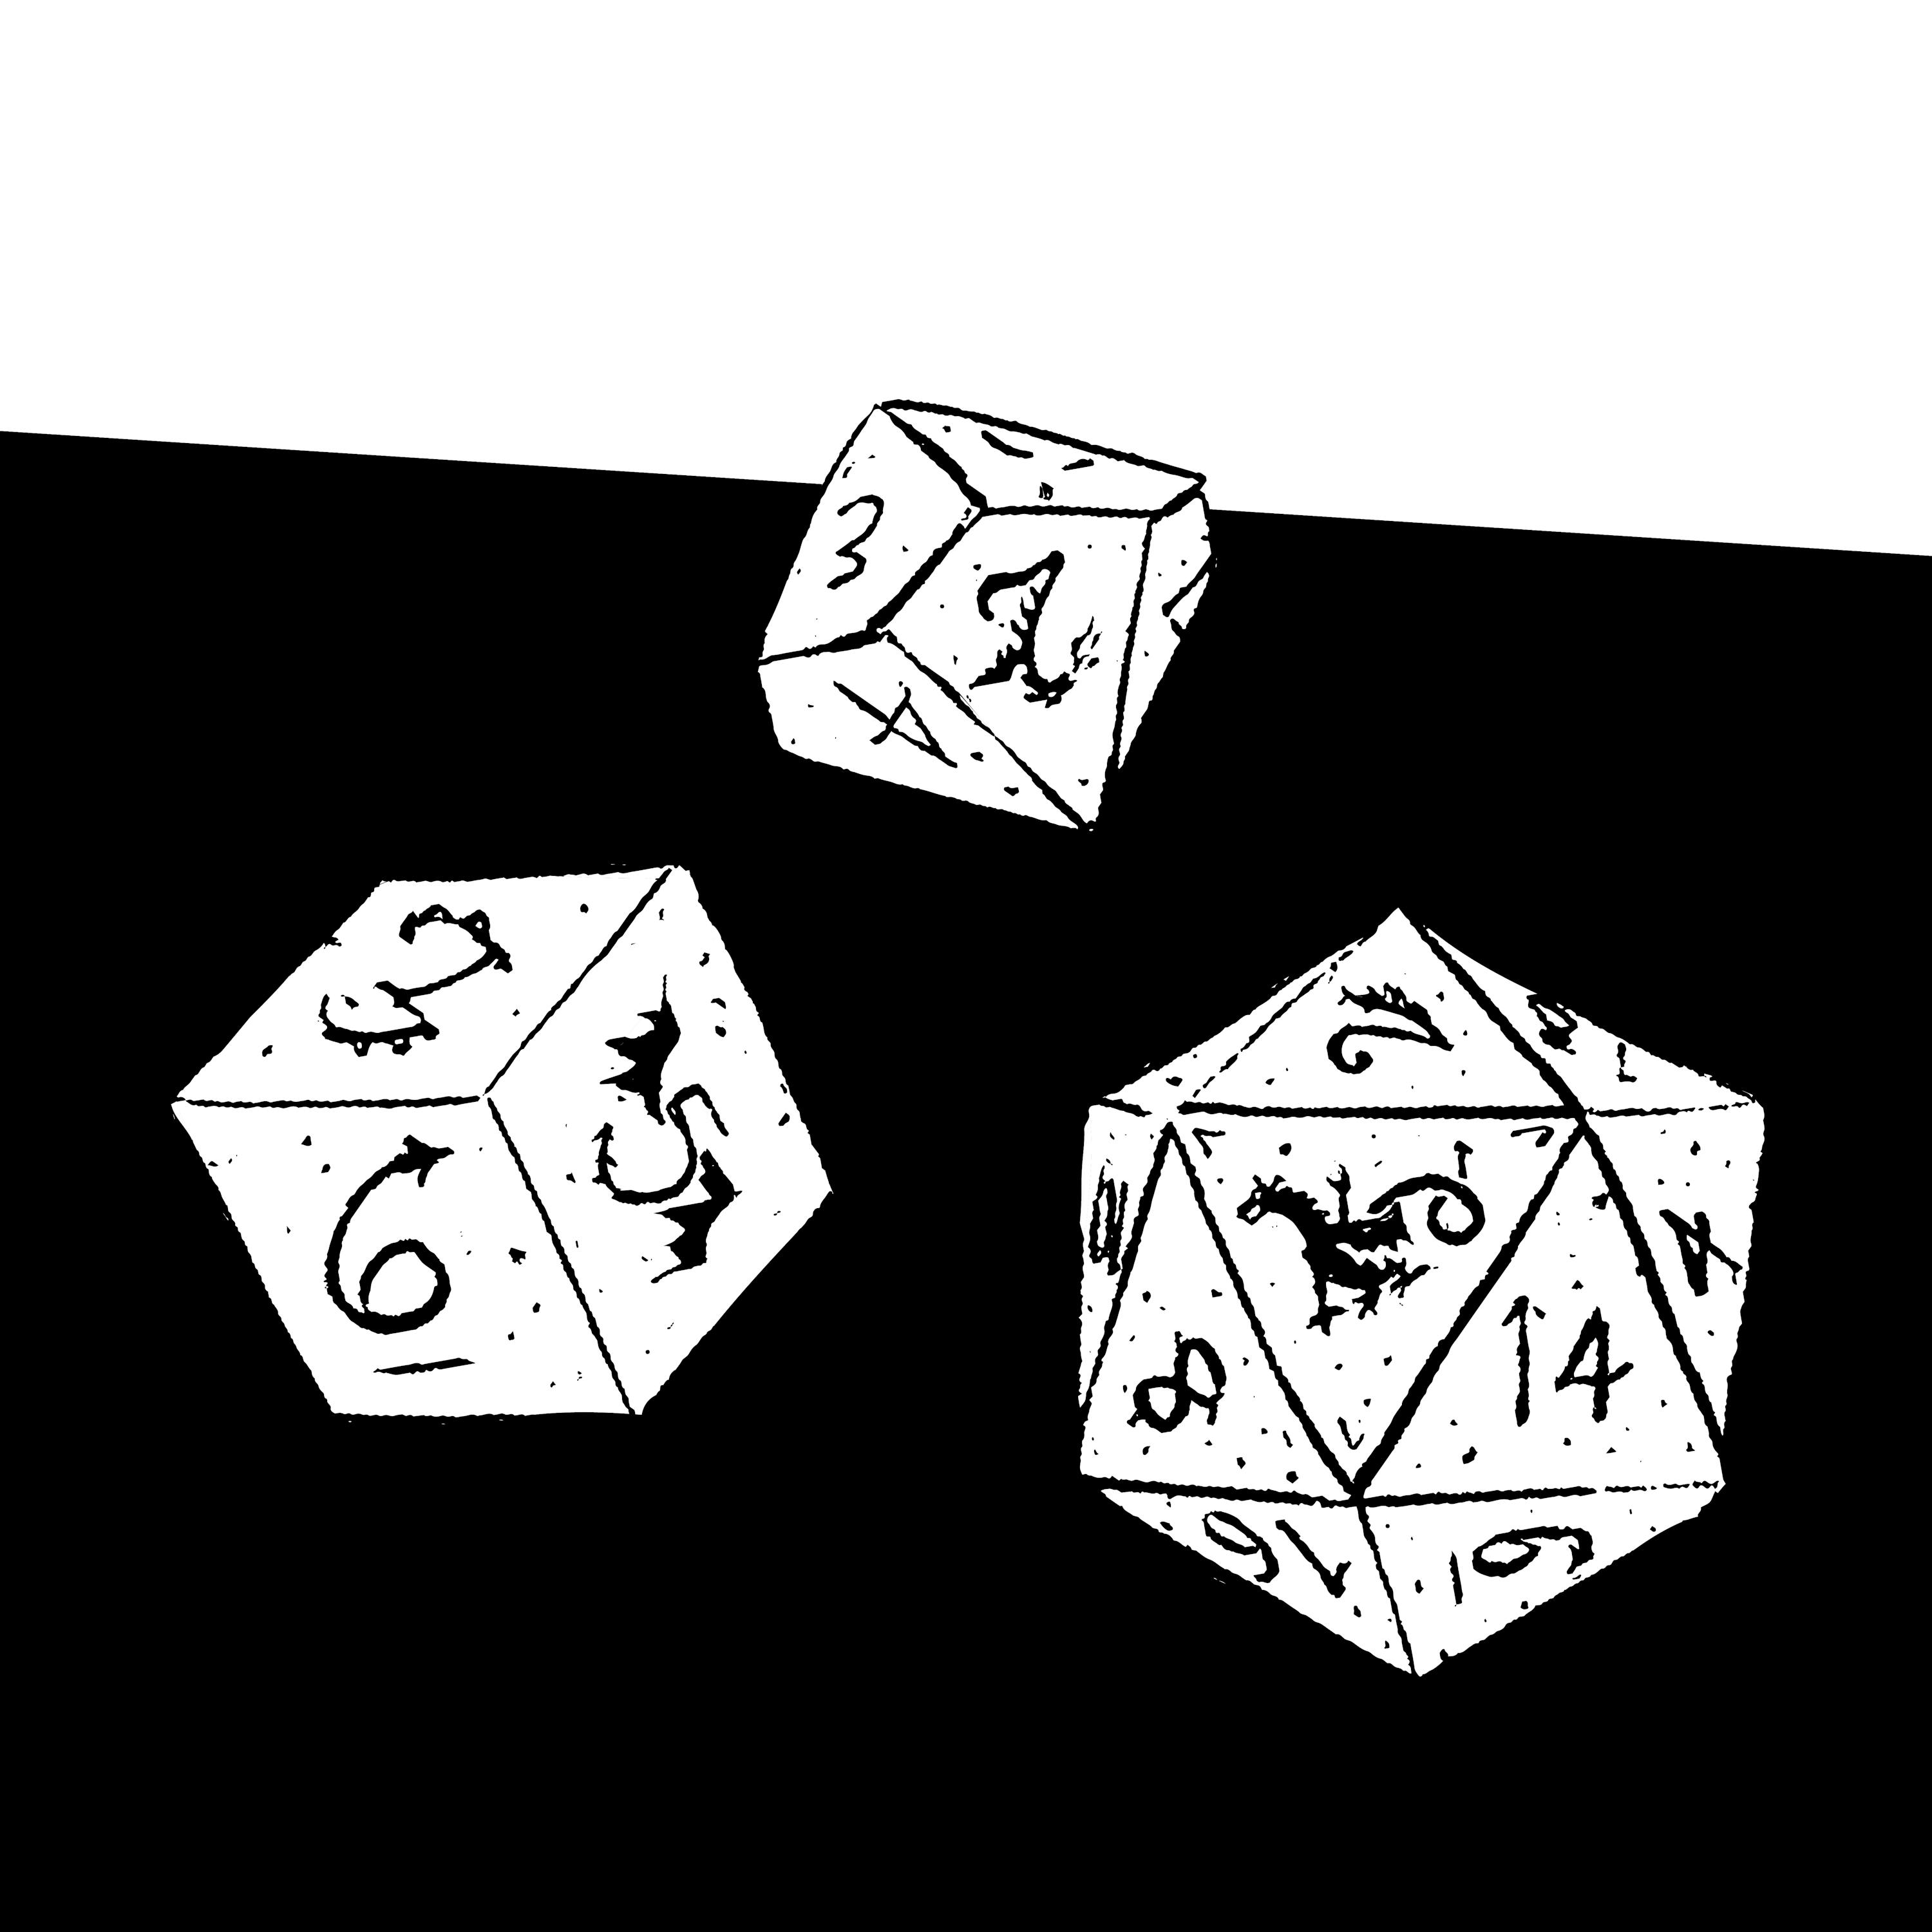 Episode 228: Roll of the Dice